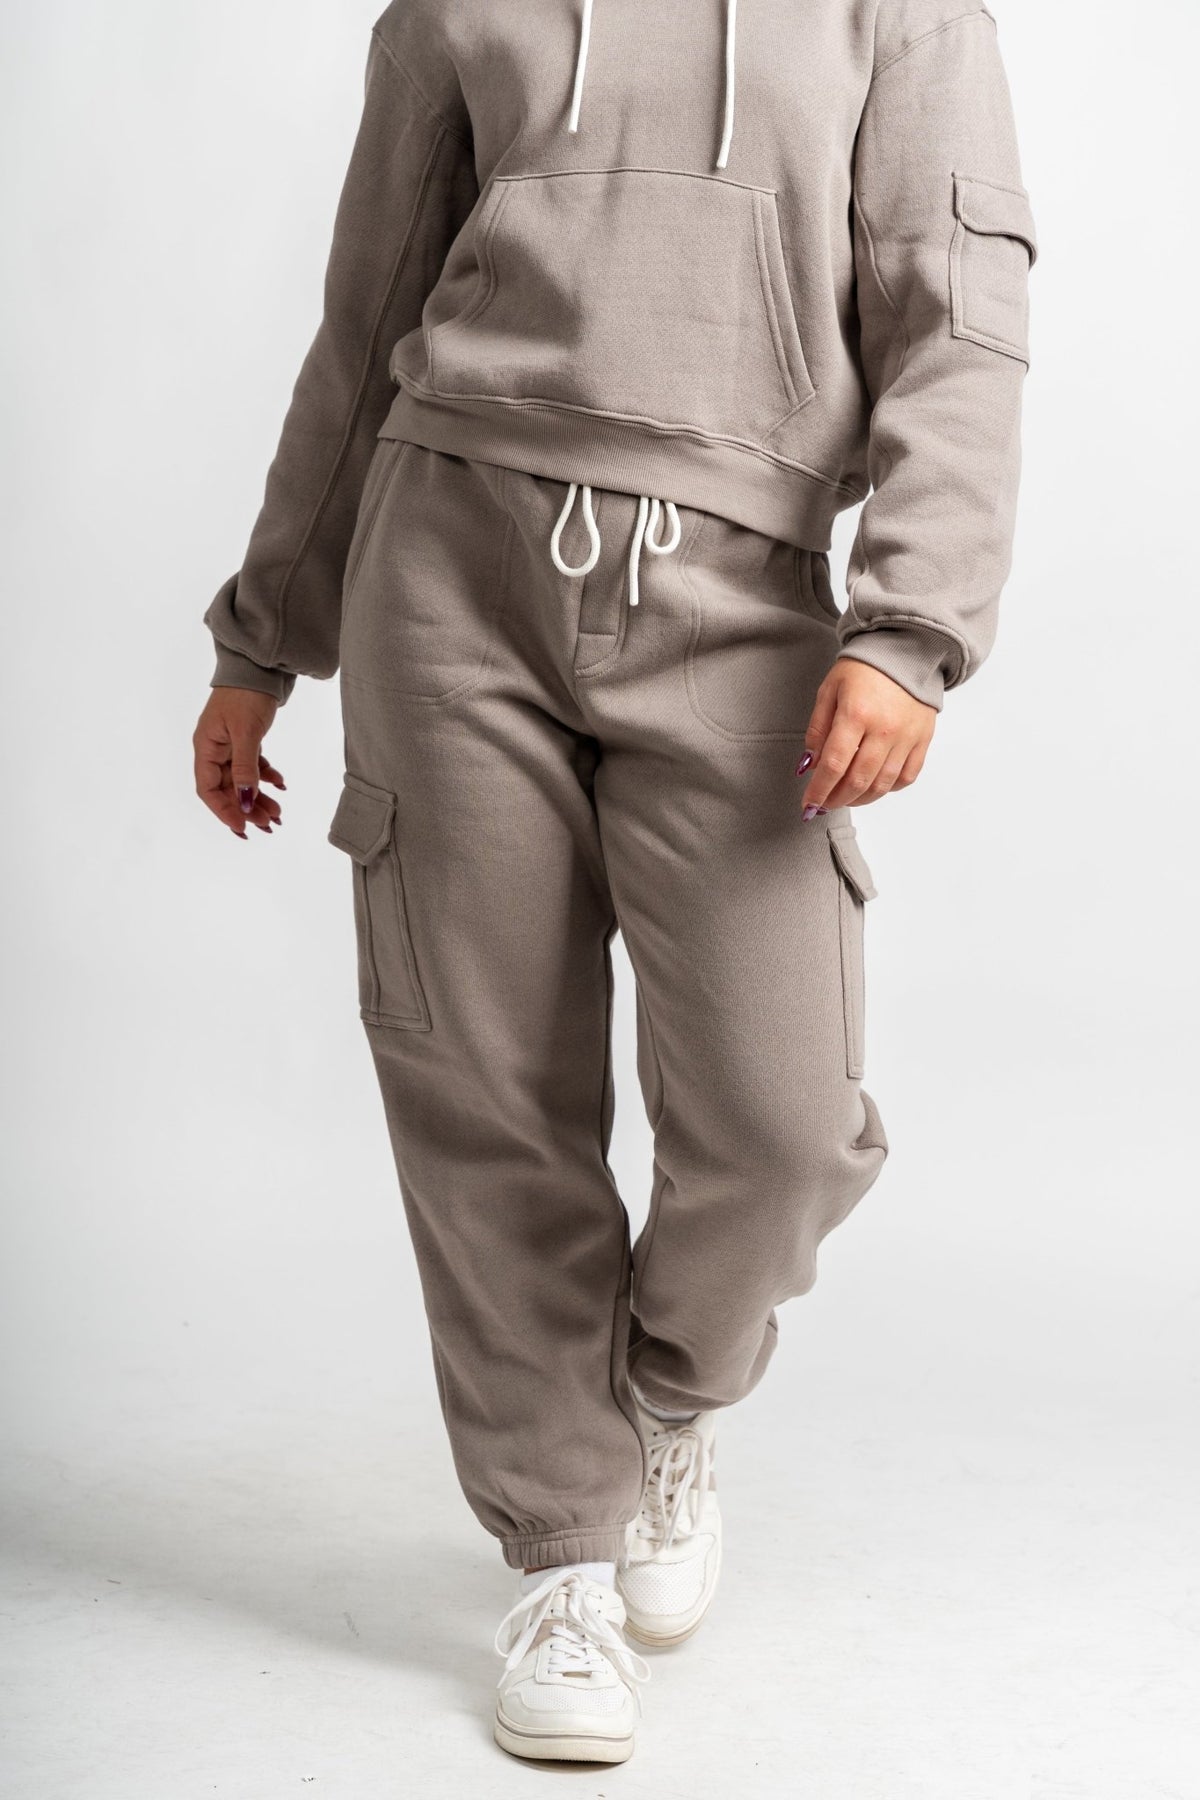 Z Supply cargo joggers lunar grey - Z Supply joggers - Z Supply Tops, Dresses, Tanks, Tees, Cardigans, Joggers and Loungewear at Lush Fashion Lounge